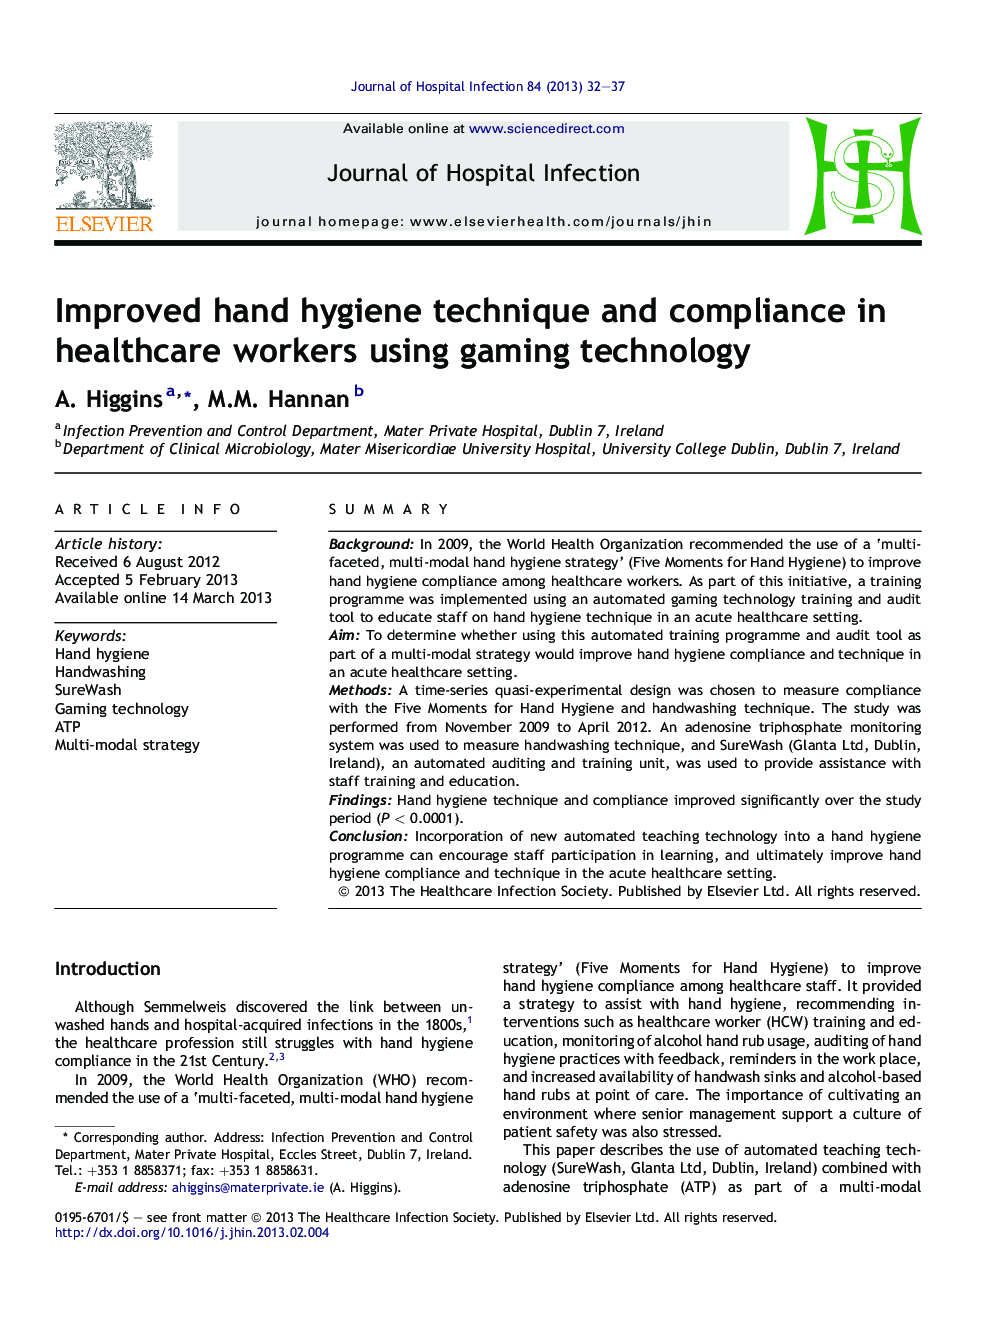 Improved hand hygiene technique and compliance in healthcare workers using gaming technology